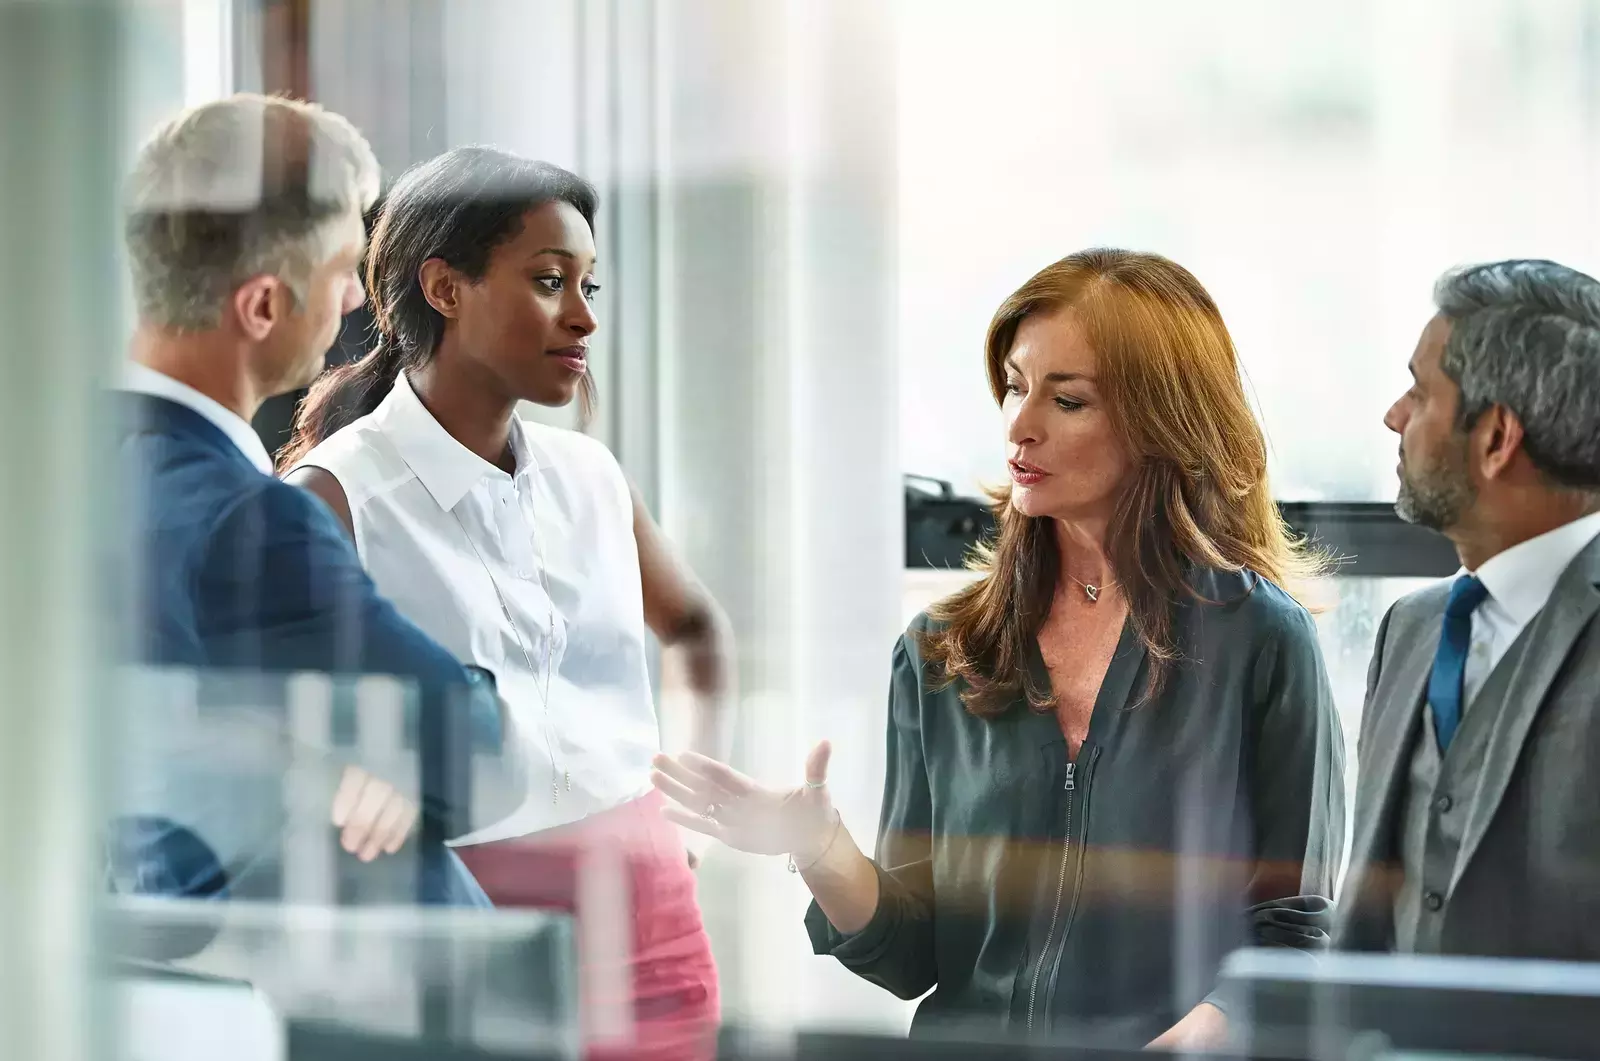 HR executives behind glass standing in conference room discussing pay equity